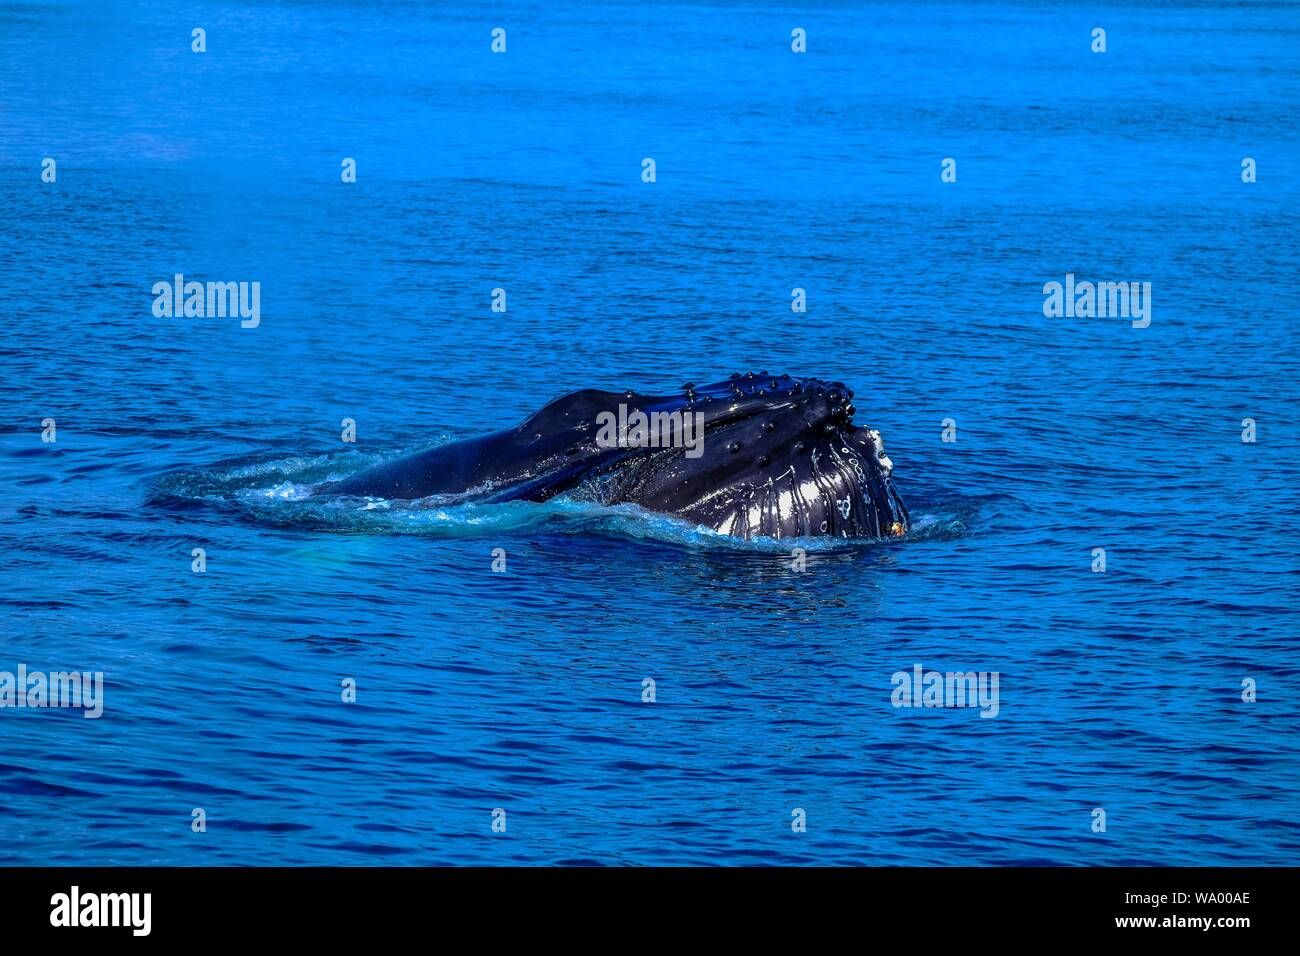 Outstanding shot of a humpback whale in the sea Stock Photo